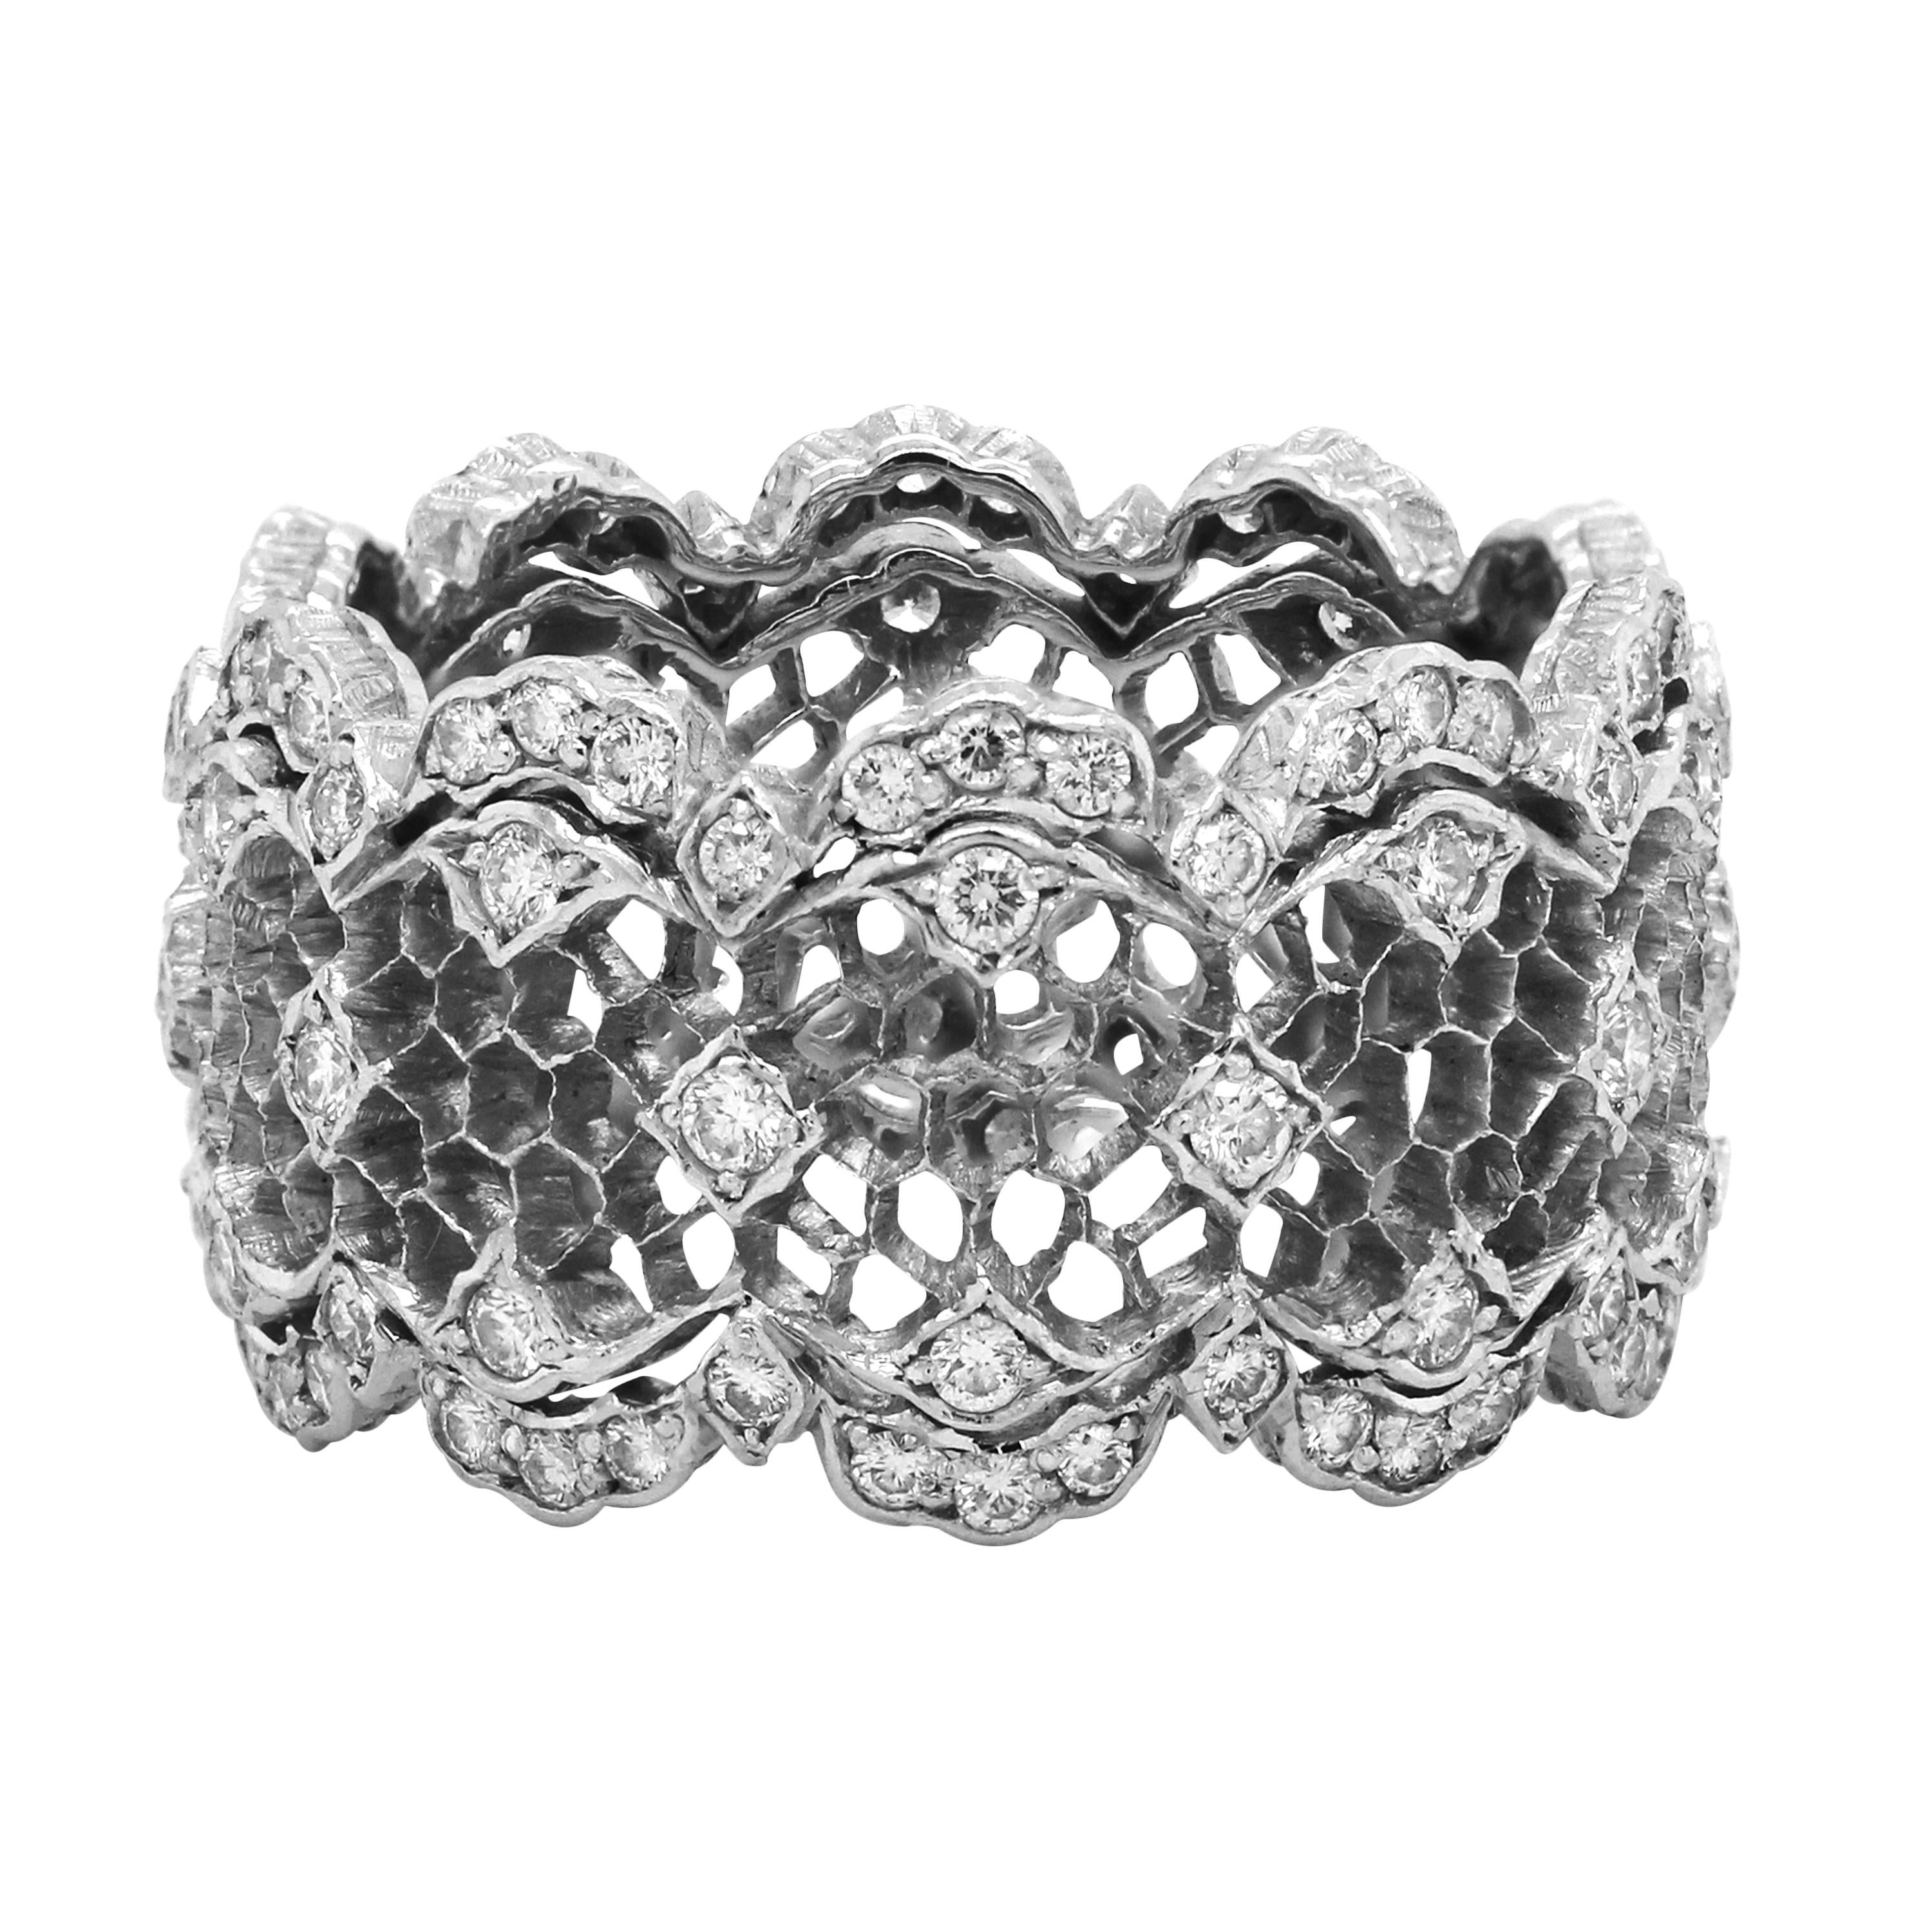 Buccellati 18K White Gold Diamond Honeycomb Tulle Ghirlanda Openwork Band Ring

This iconic band ring by Buccellati has an openwork, honeycomb design with diamonds all around.

0.86 carat G color, VS clarity diamonds total weight

12mm band